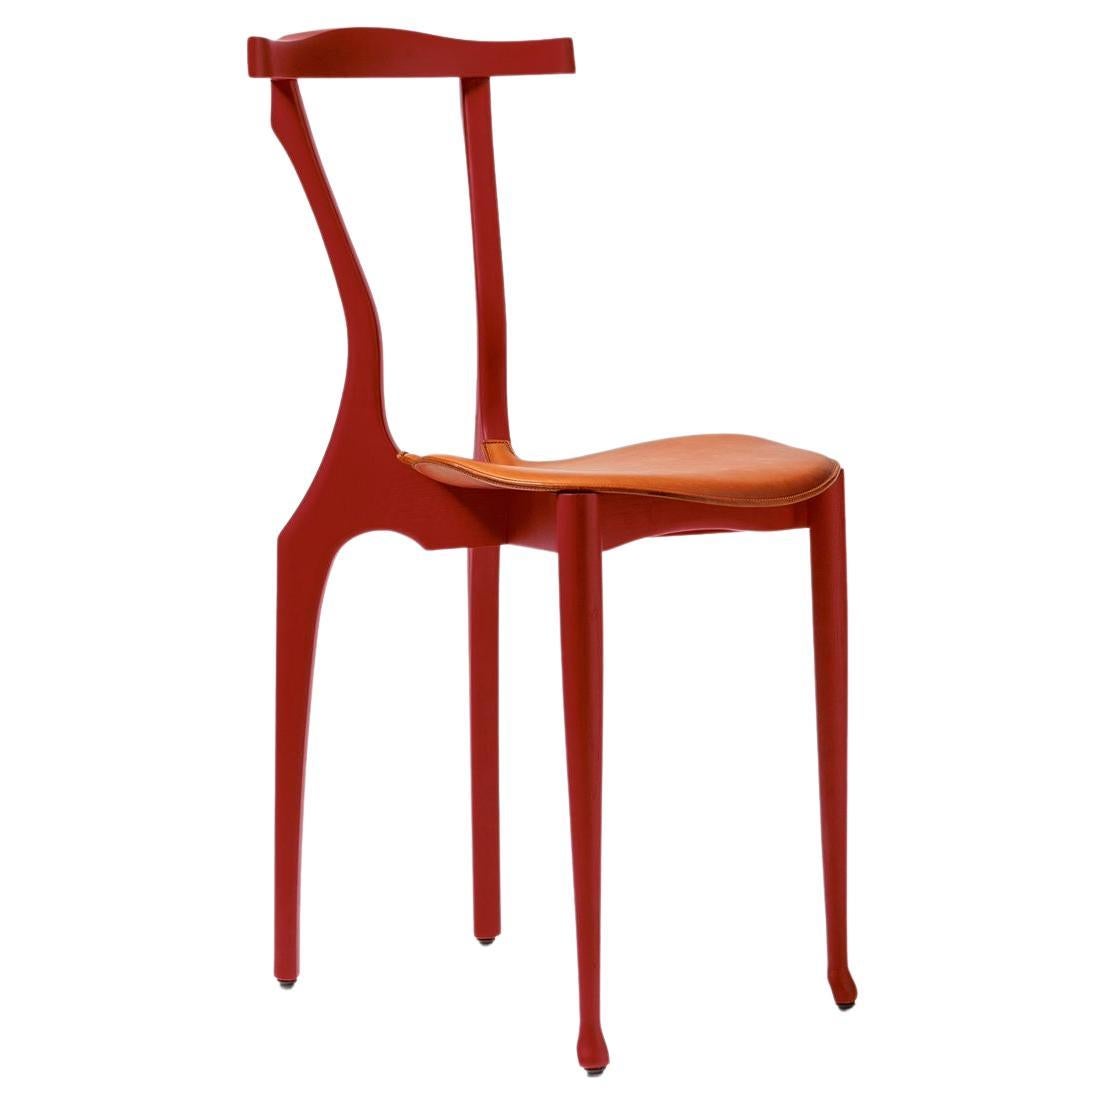 Contemporary Spanish design "Gaulinetta" chair by Oscar Tusquets red ash wood For Sale